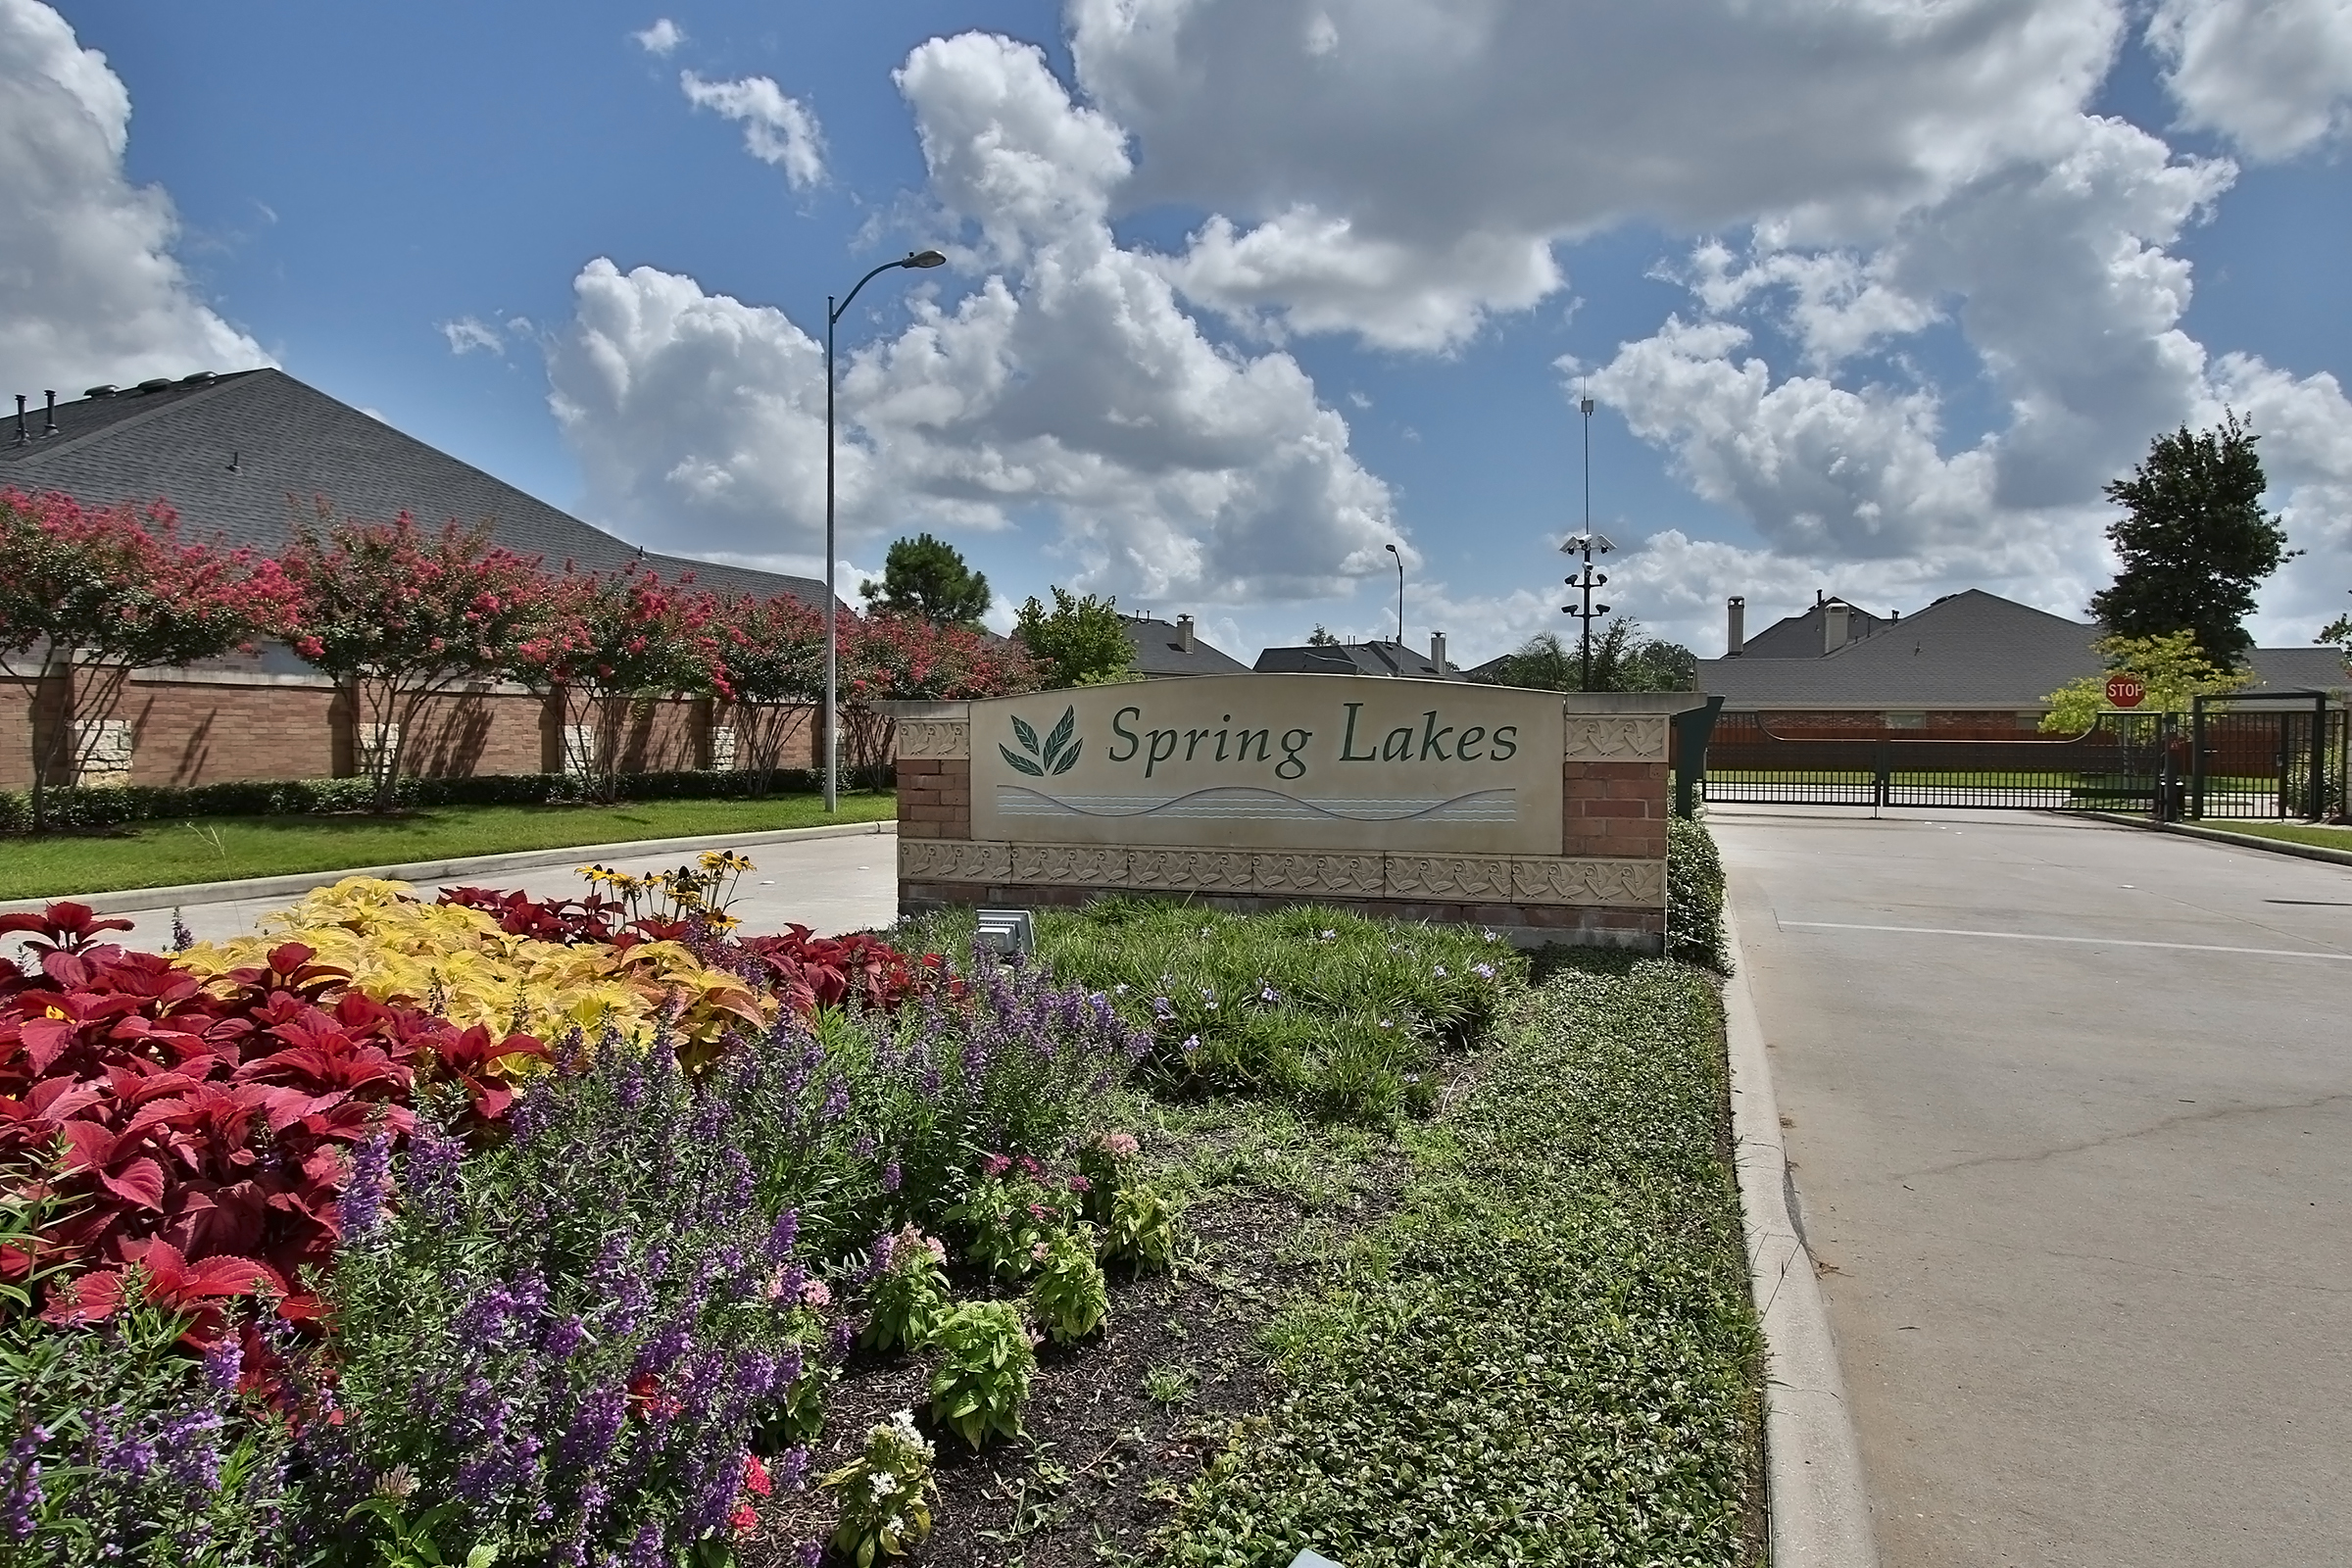 Spring Lakes Homes for Sale | Spring TX Subdivisions